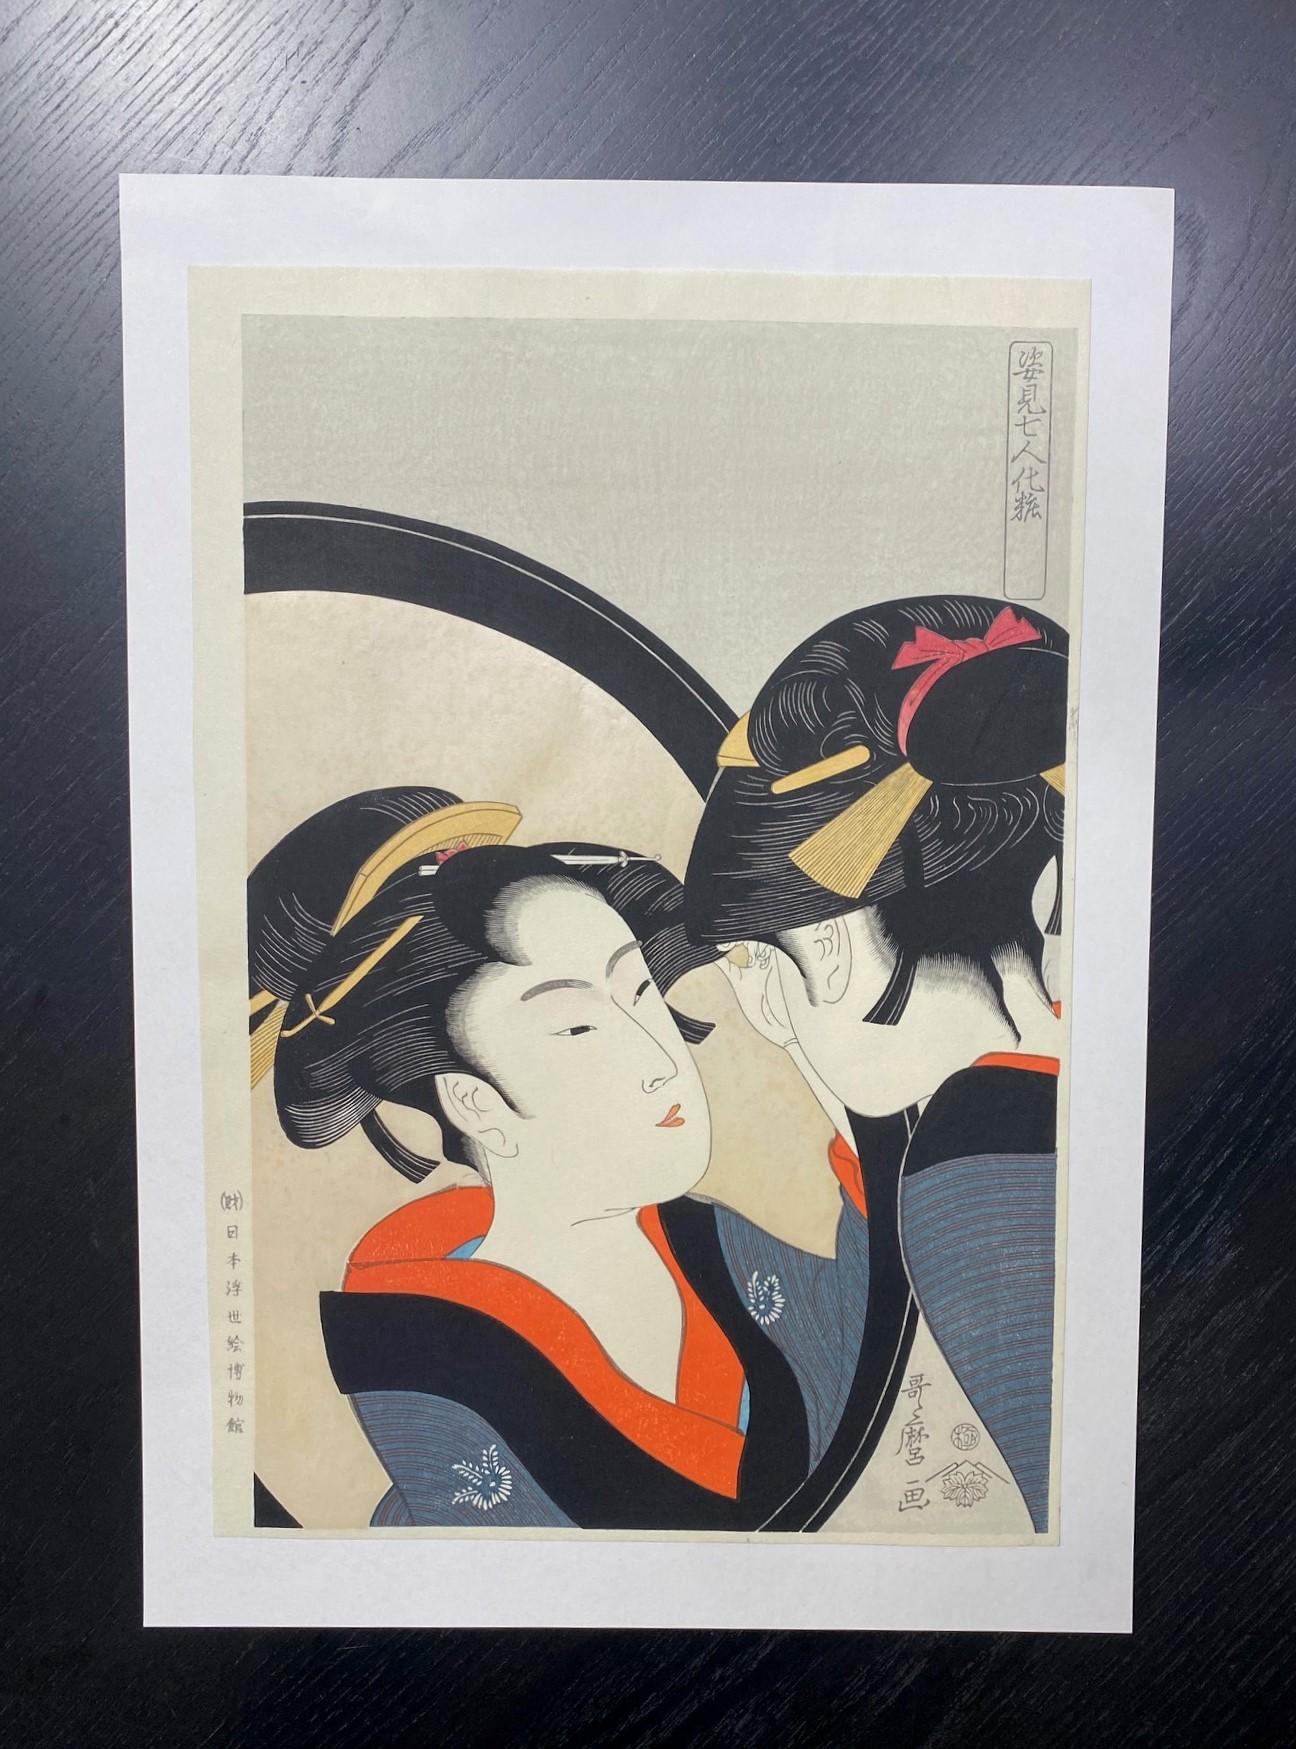 A beautifully composed and subtly colored Japanese woodblock print featuring a well-dressed woman gazing admiringly at herself in her vanity mirror.  This work is by Kitagawa Utamaro and is titled 